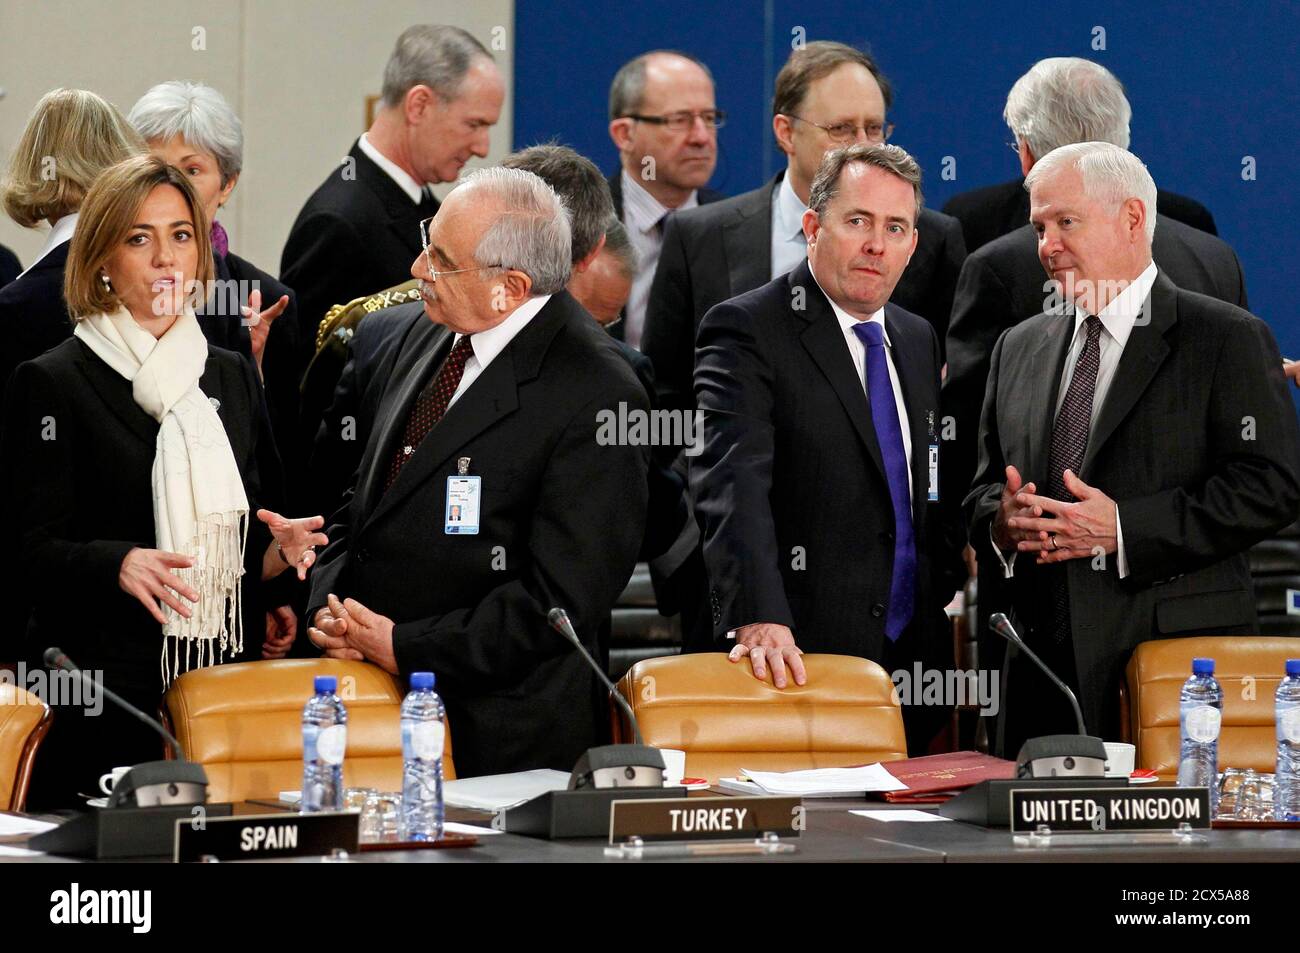 (L-R) Spain's Defence Minister Carme Chacon, her Turkish counterpart Vecdi Gonul , Britain's Defence Secretary Liam Fox and U.S. Defense Secretary Robert Gates attend a NATO defence ministers meeting (NAC) at the Alliance headquarters in Brussels March 10, 2011. NATO defence ministers meeting in Brussels on Thursday and Friday will discuss options to respond to the turmoil in Libya, including a possible no-fly zone, the officials said.      REUTERS/Yves Herman (BELGIUM - Tags: POLITICS CIVIL UNREST MILITARY IMAGES OF THE DAY) Stock Photo